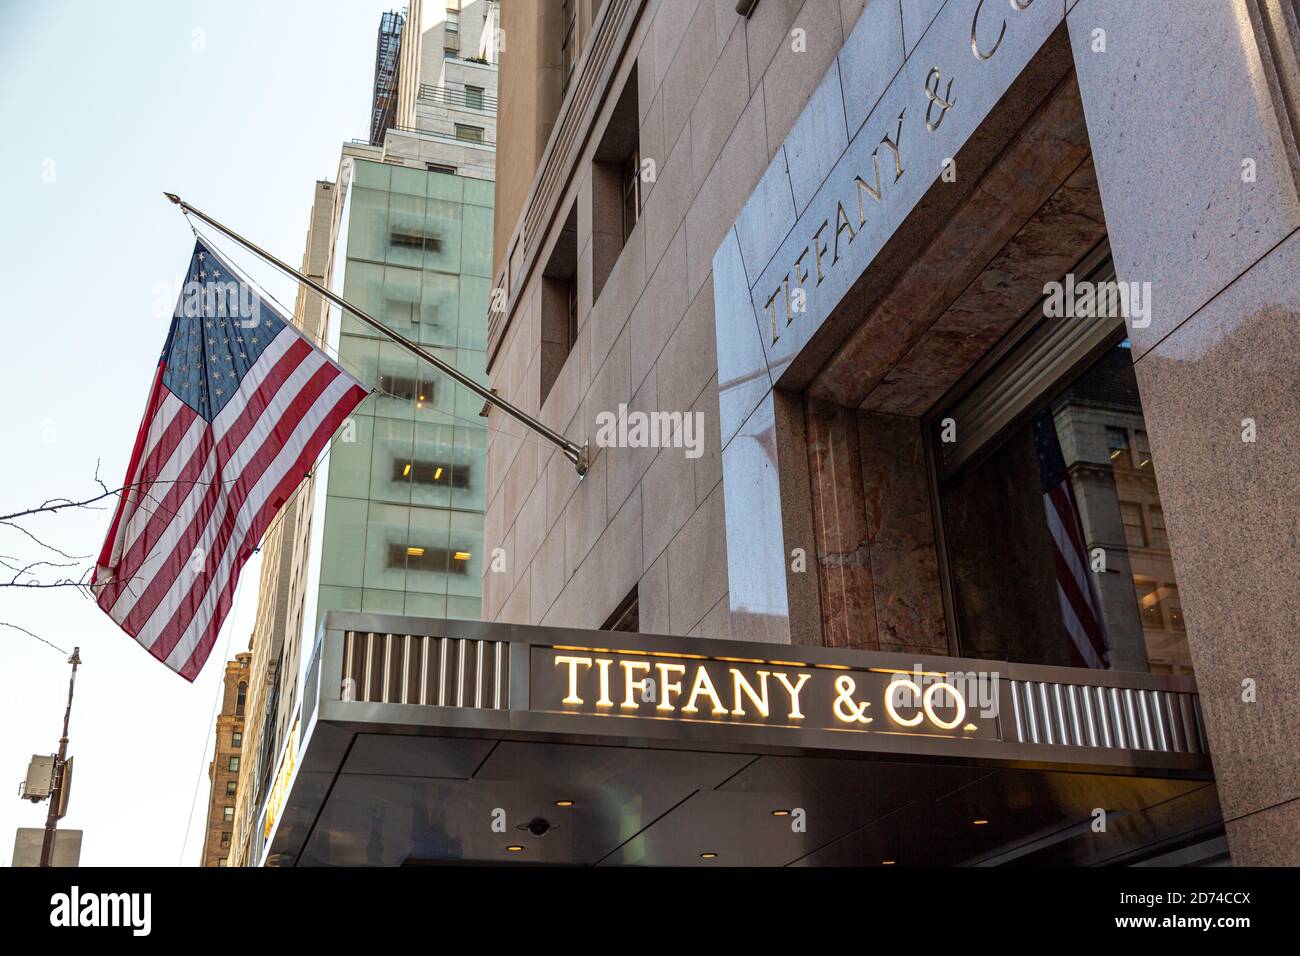 Tiffany & Co flagship store at the corner of Fifth Avenue and 57th